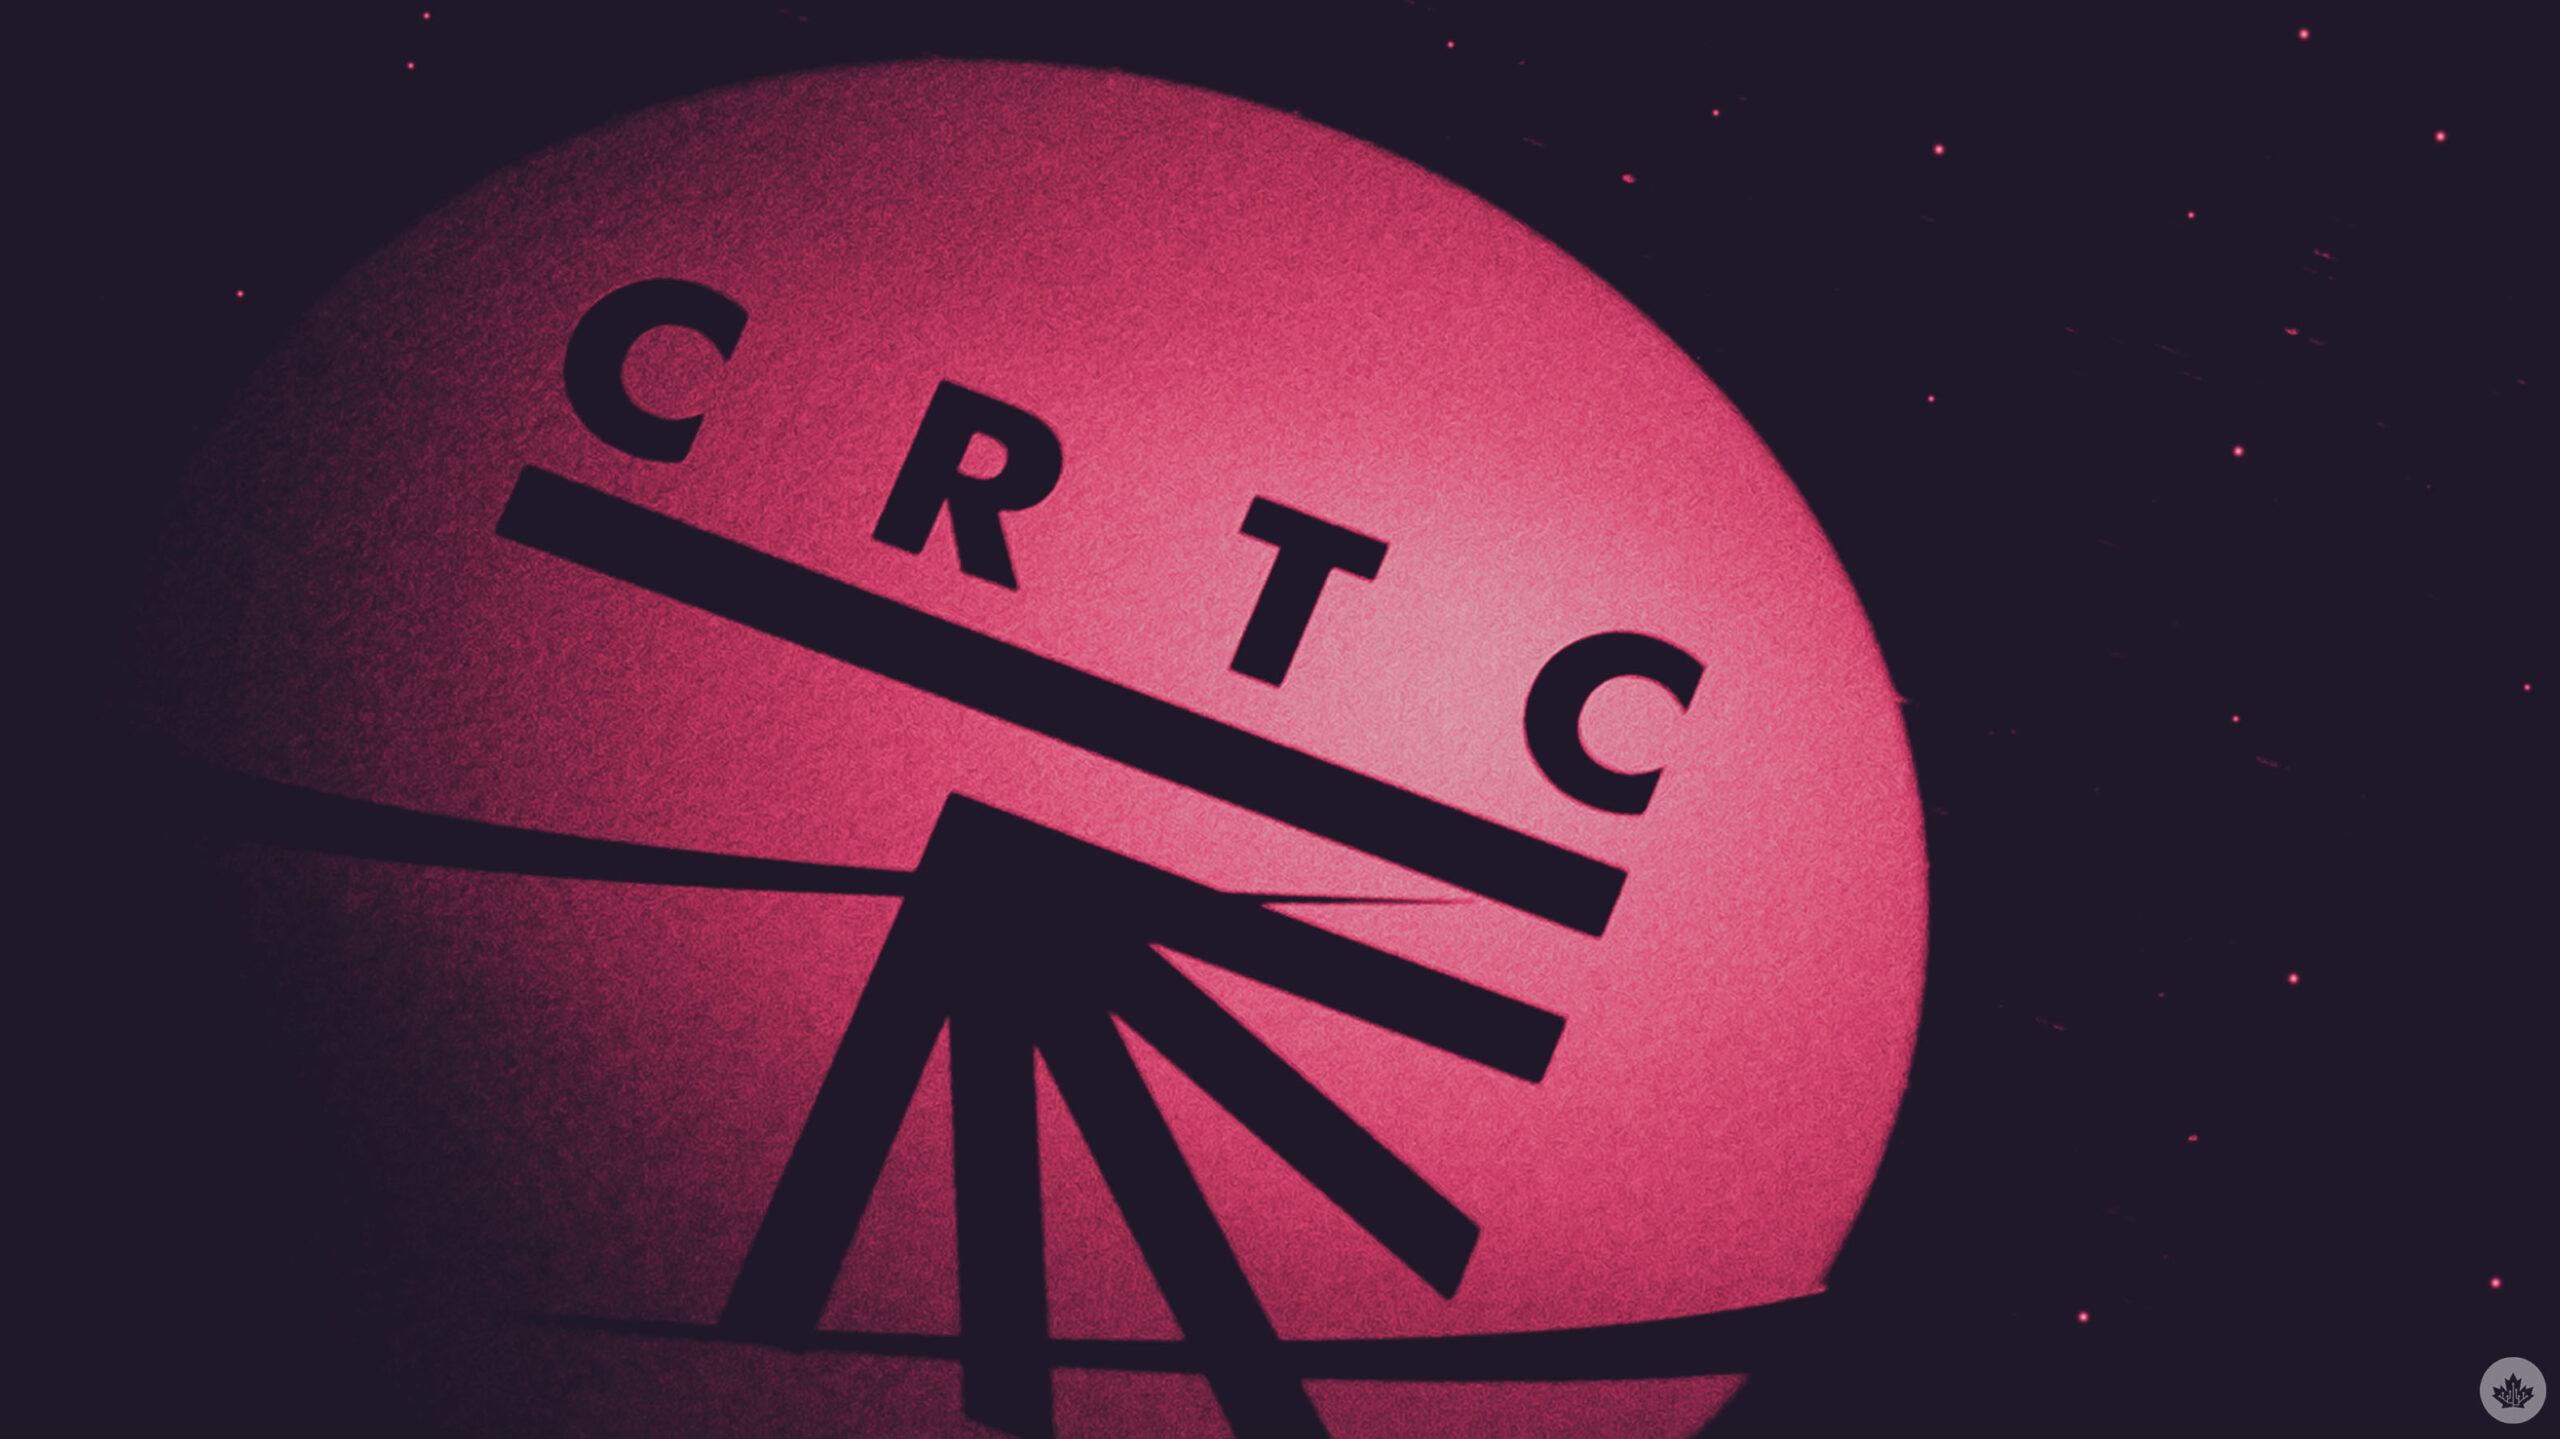 CRTC warns of scam calls claiming to be them. 26